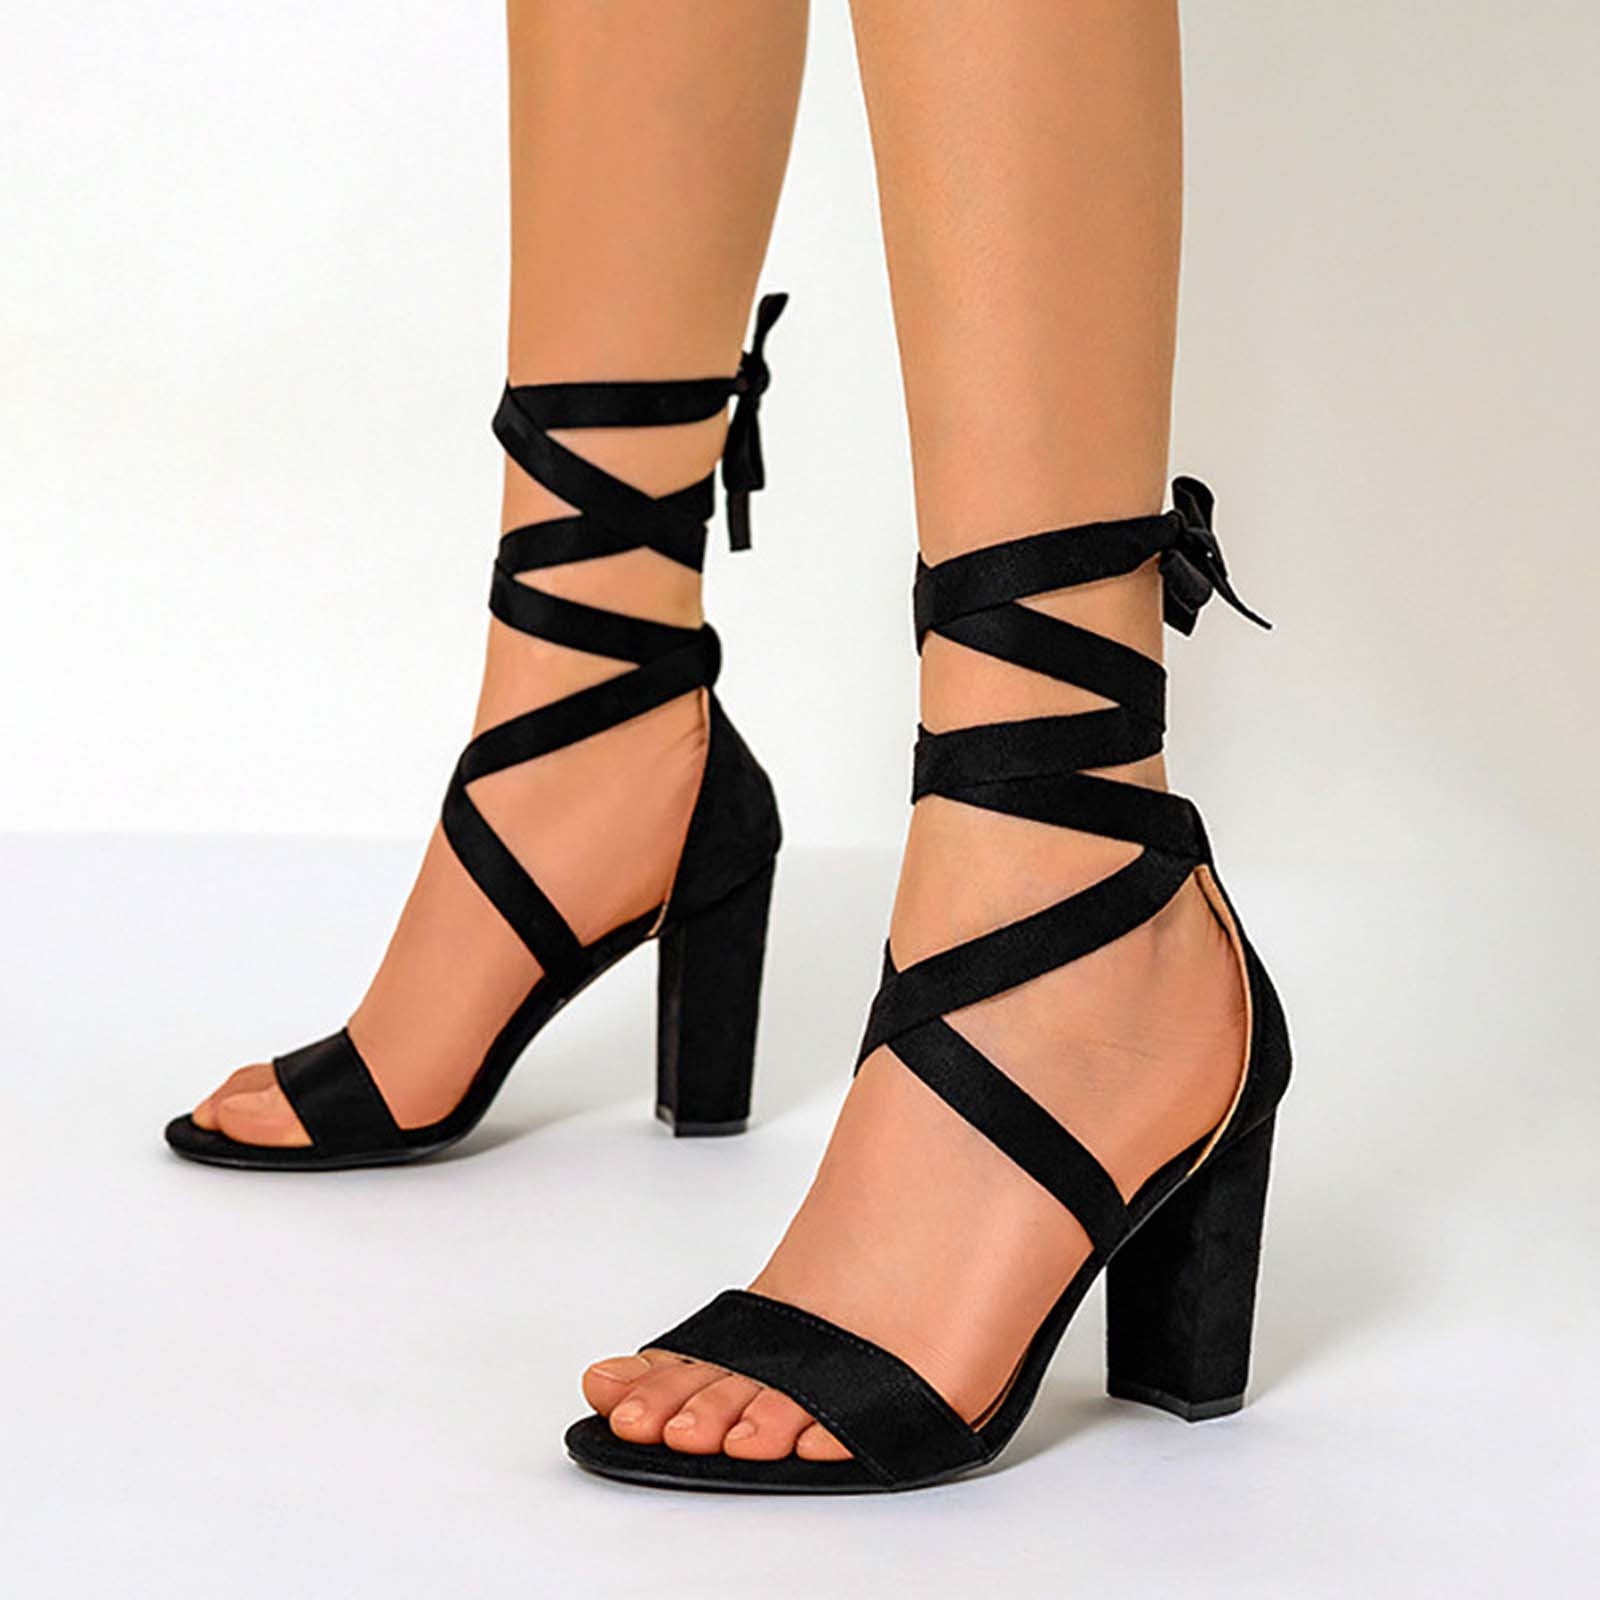 Vee Heels | No! Shoes | Clearance Shoes | Illusions Lingerie